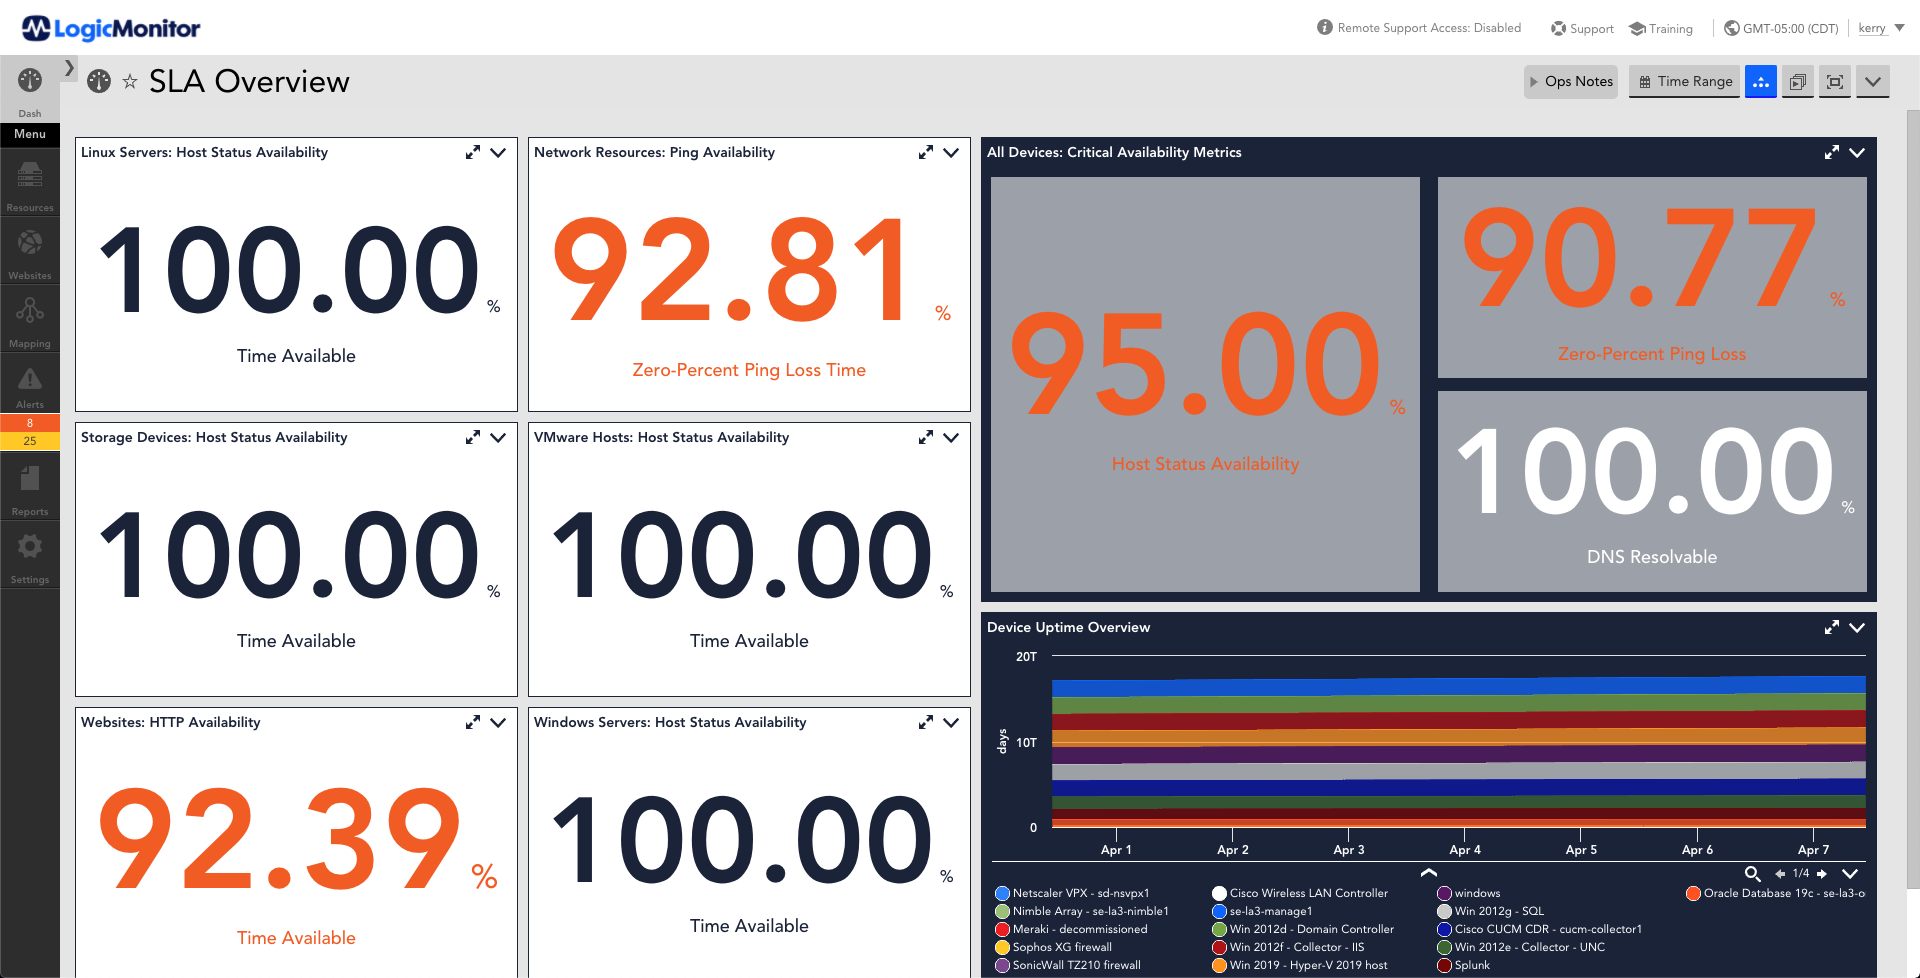 This dashboard provides an overview of SLAs. The metrics displayed are Linux server status, network resource availability, all device availability, storage availability, vm availability, host availability, HTTP availability, uptime over time availability